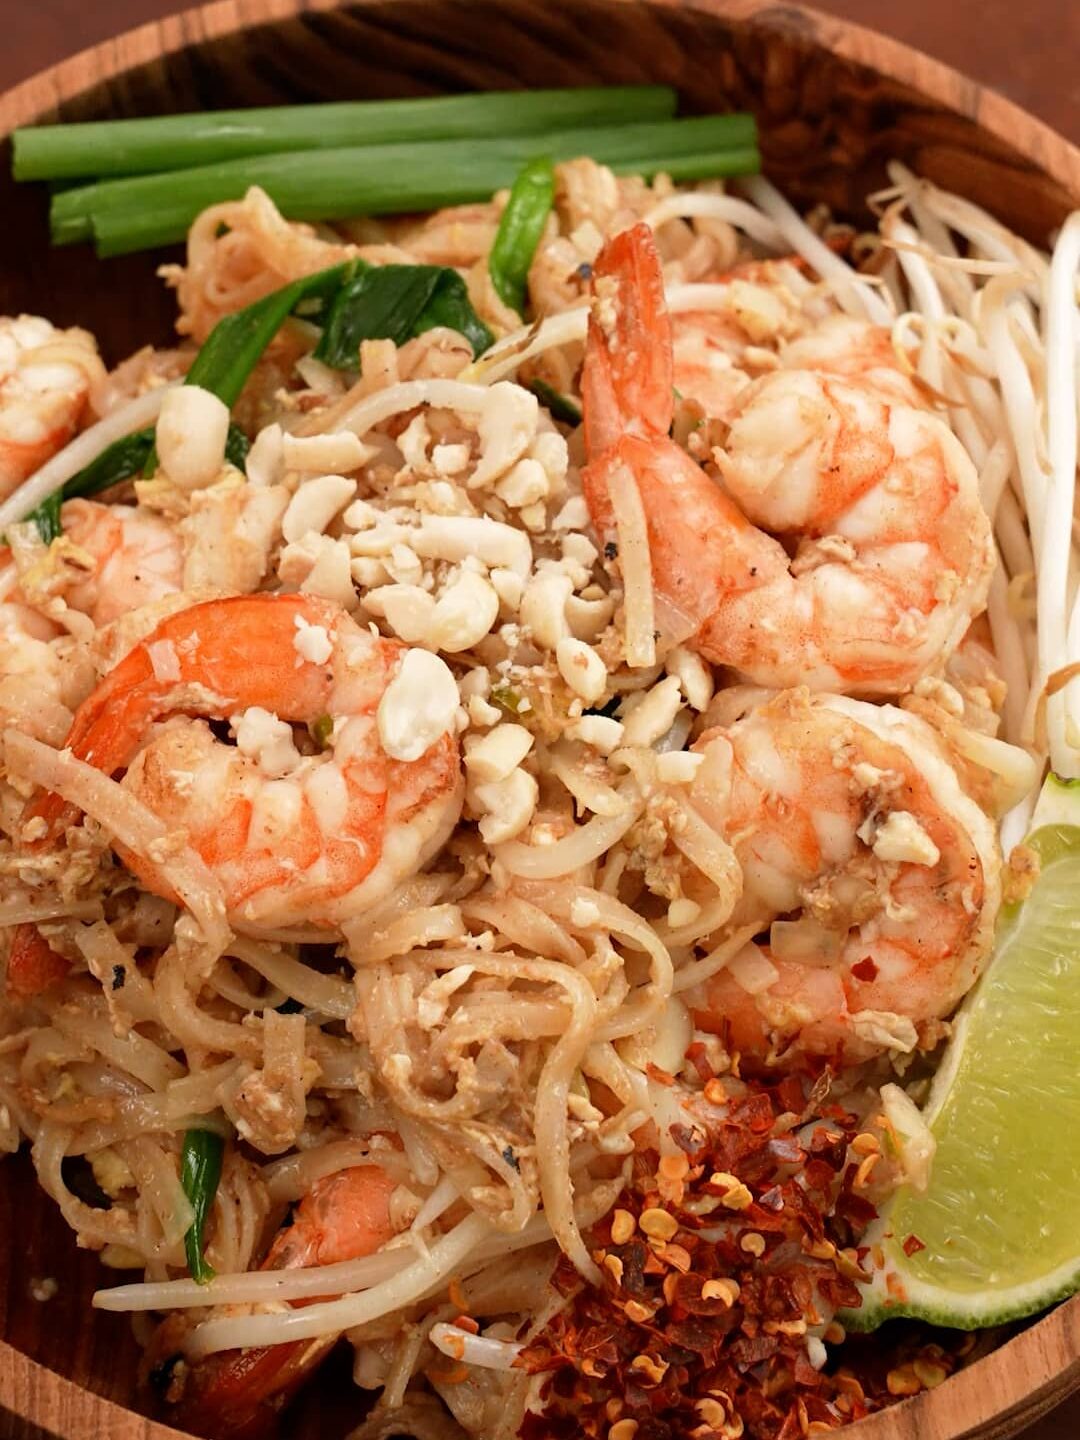 Pad Thai plated in a wooden bowl.